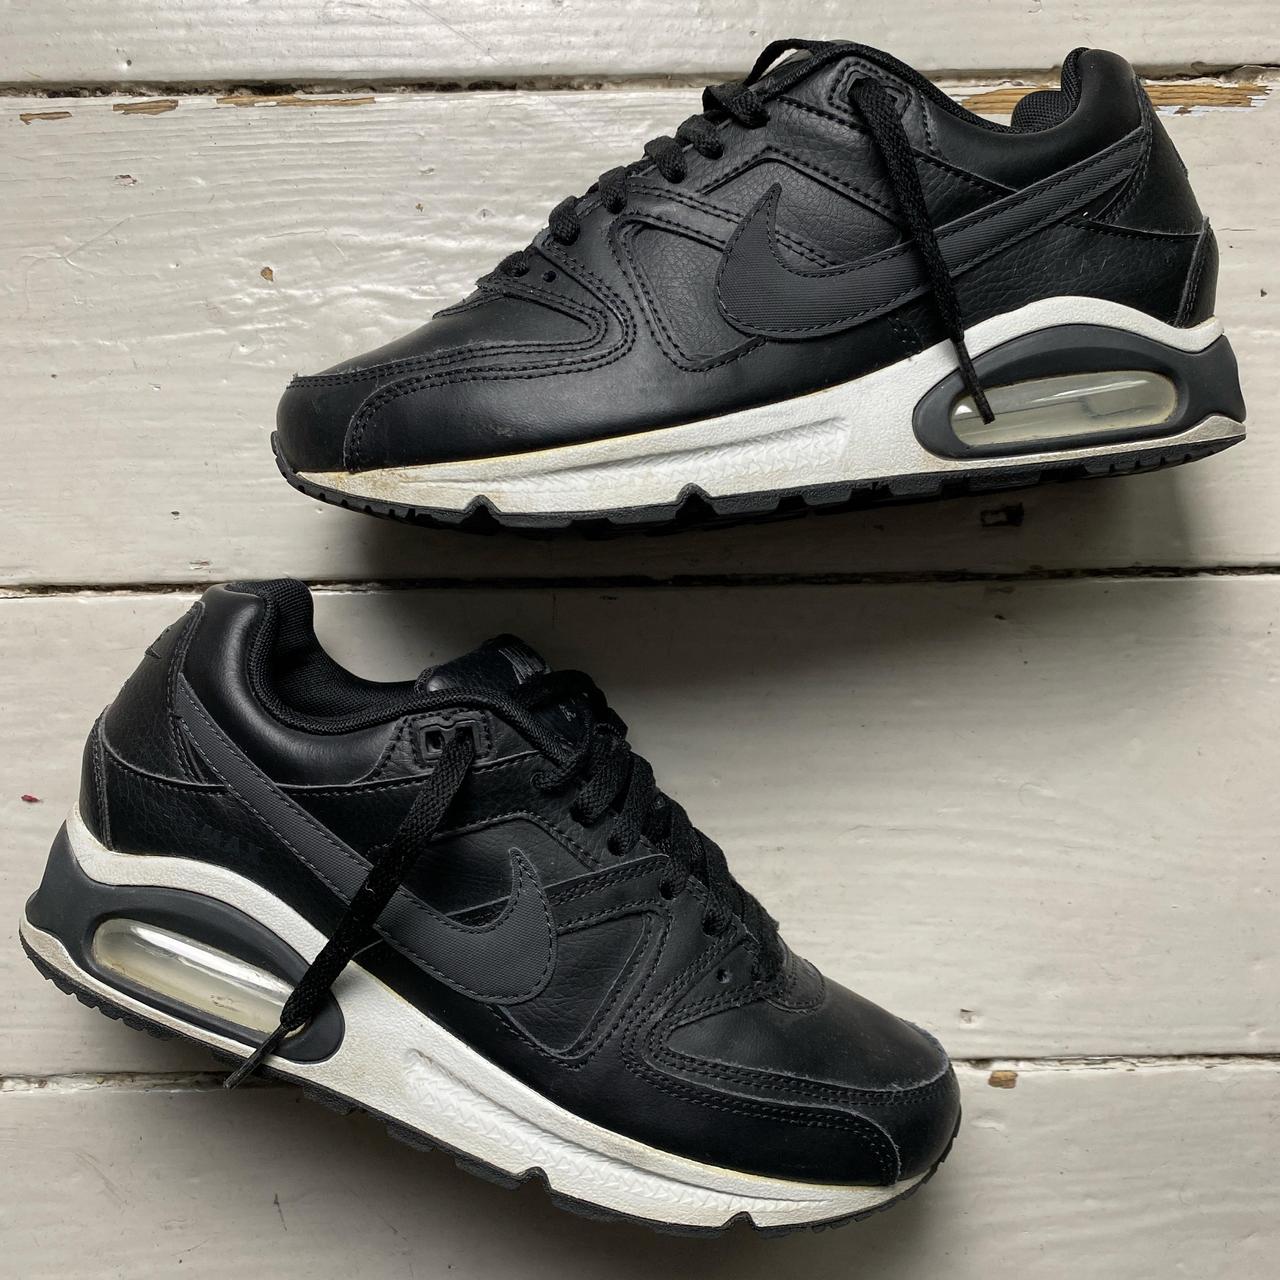 Nike Air Max Command Black and White